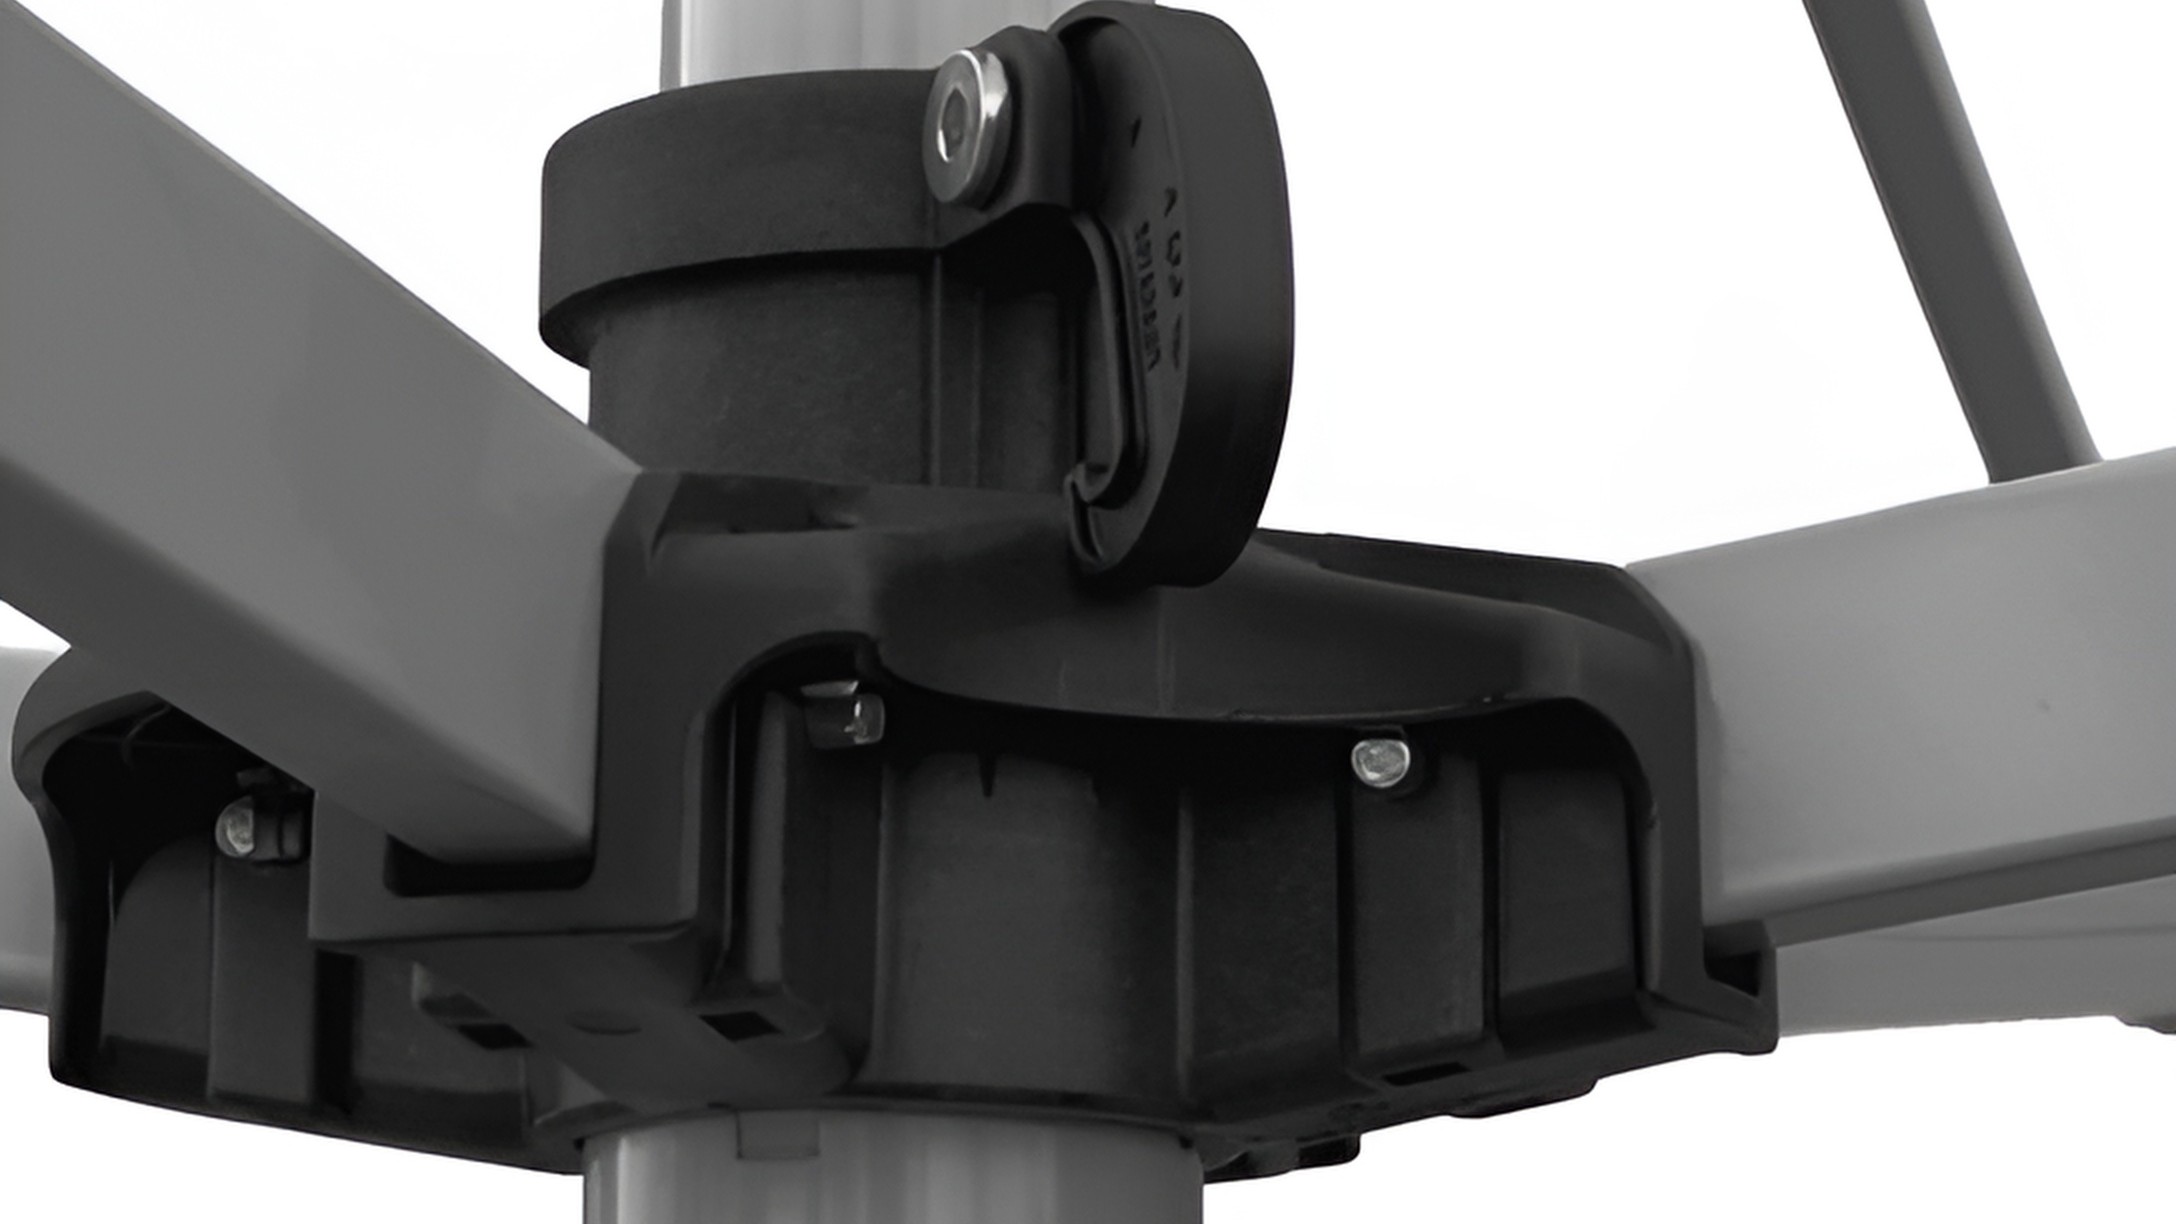 Heavy Duty Rotary Hoist Engineered for Strength: Structure and Design